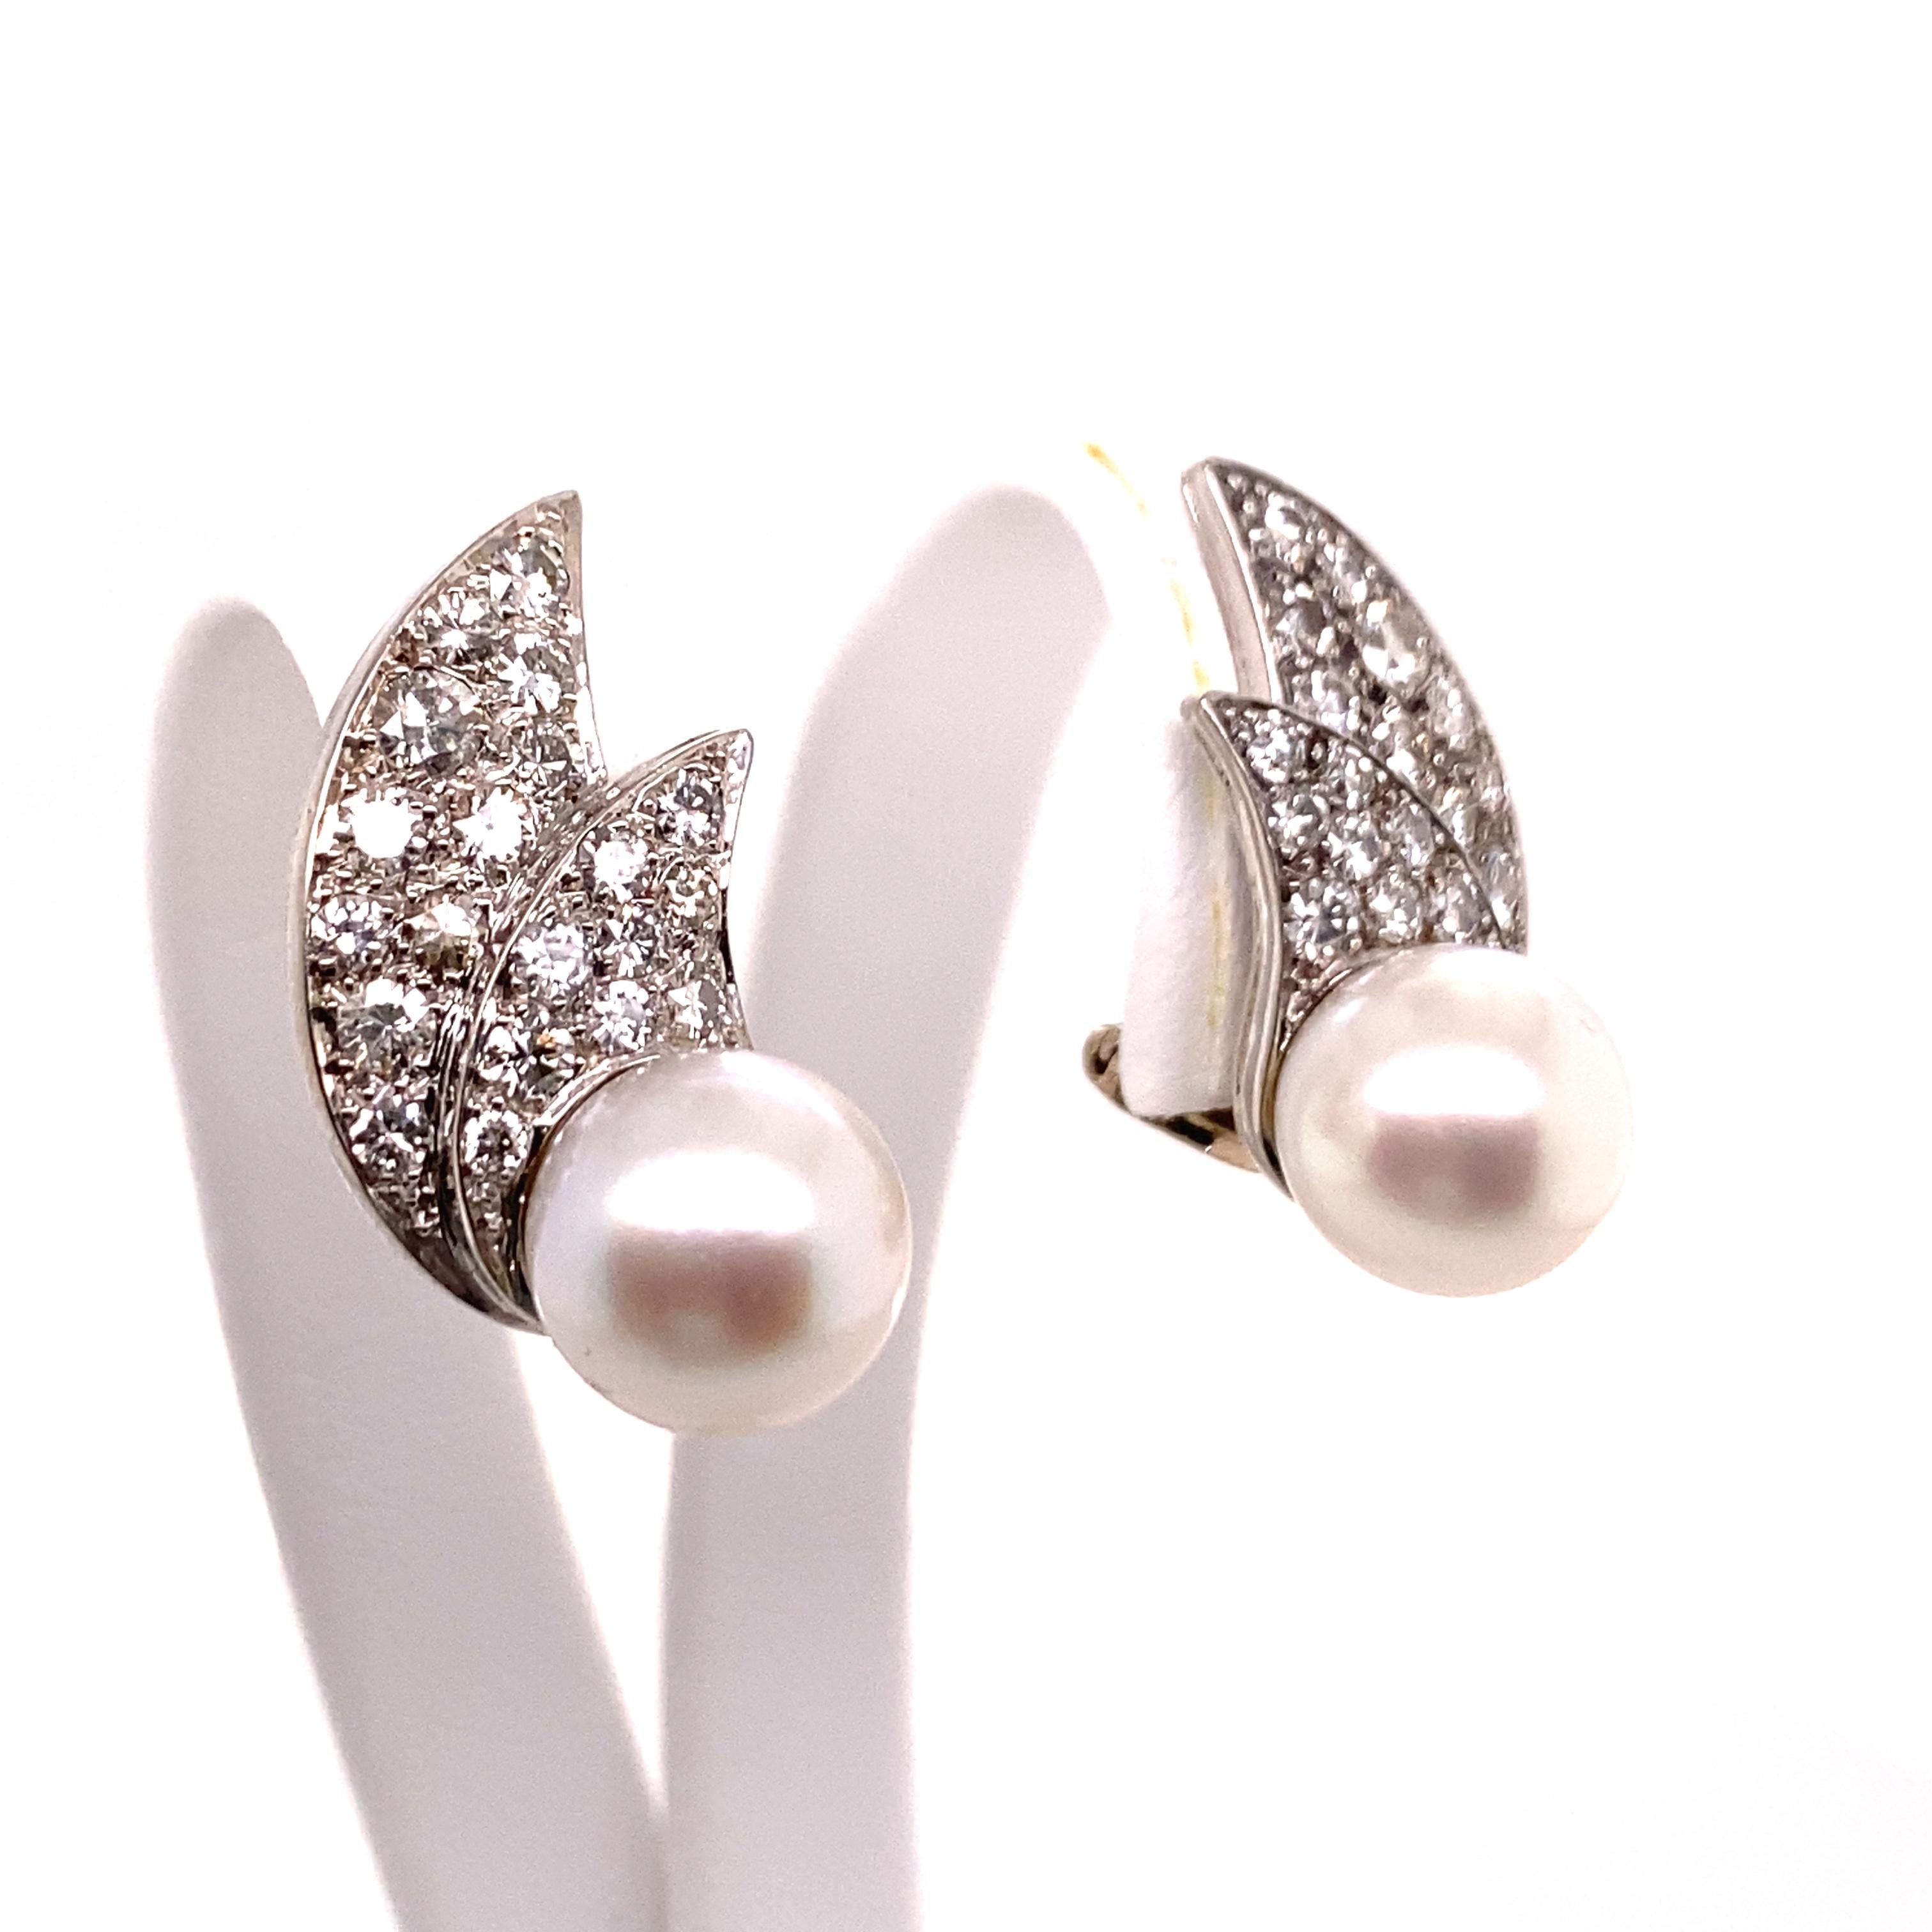 Funky cultured pearl and diamond ear clips in platinum 950. Designed as two double wings, grain set with 40 brilliant-cut diamonds totalling 0.80 ct. 

Approximate from the 1970s.

Dimensions approx.: 23.8 x 10.8 mm / 0.94 x 0.43 inches
